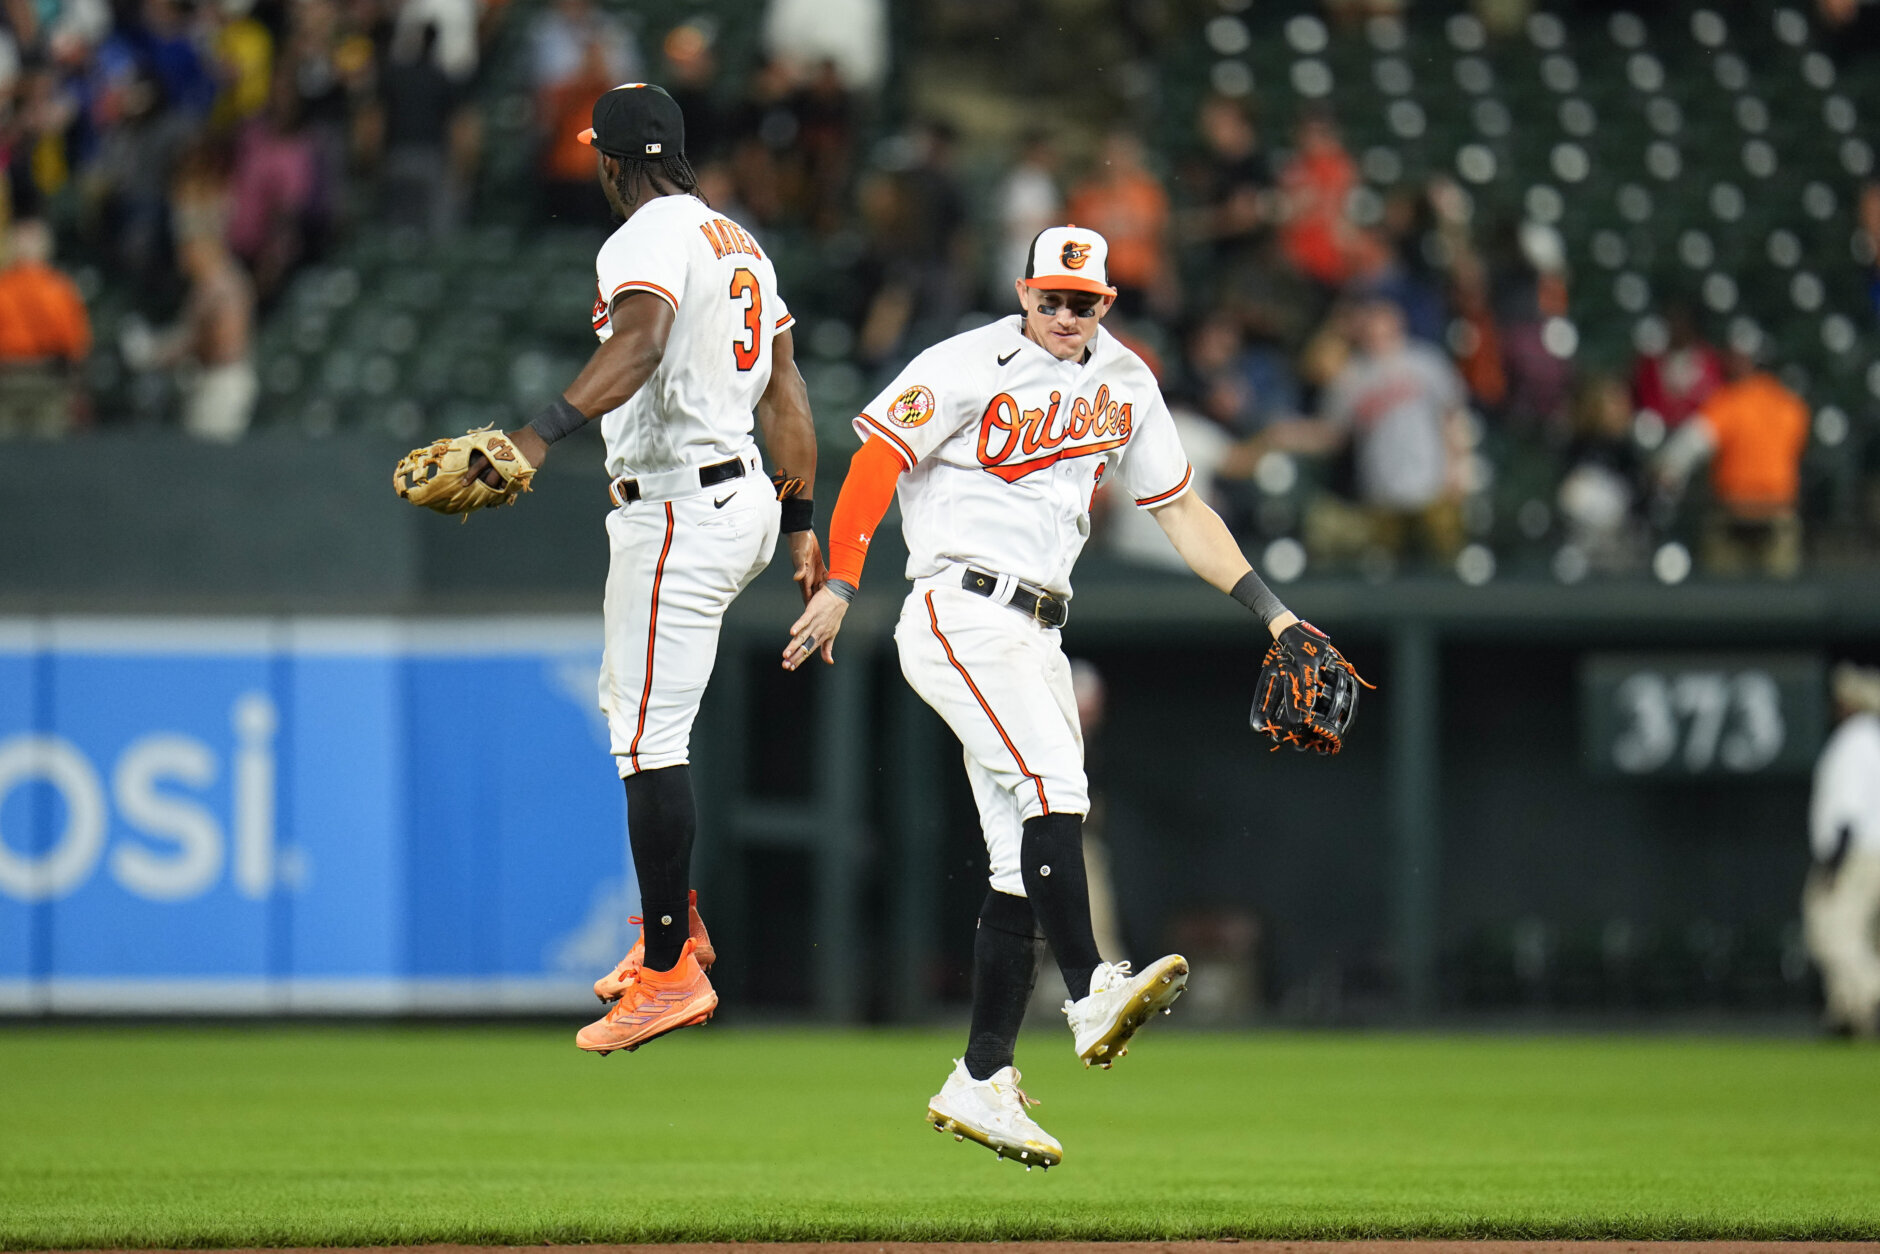 Jorge Mateo has offered excitement in his Orioles' debut - Camden Chat